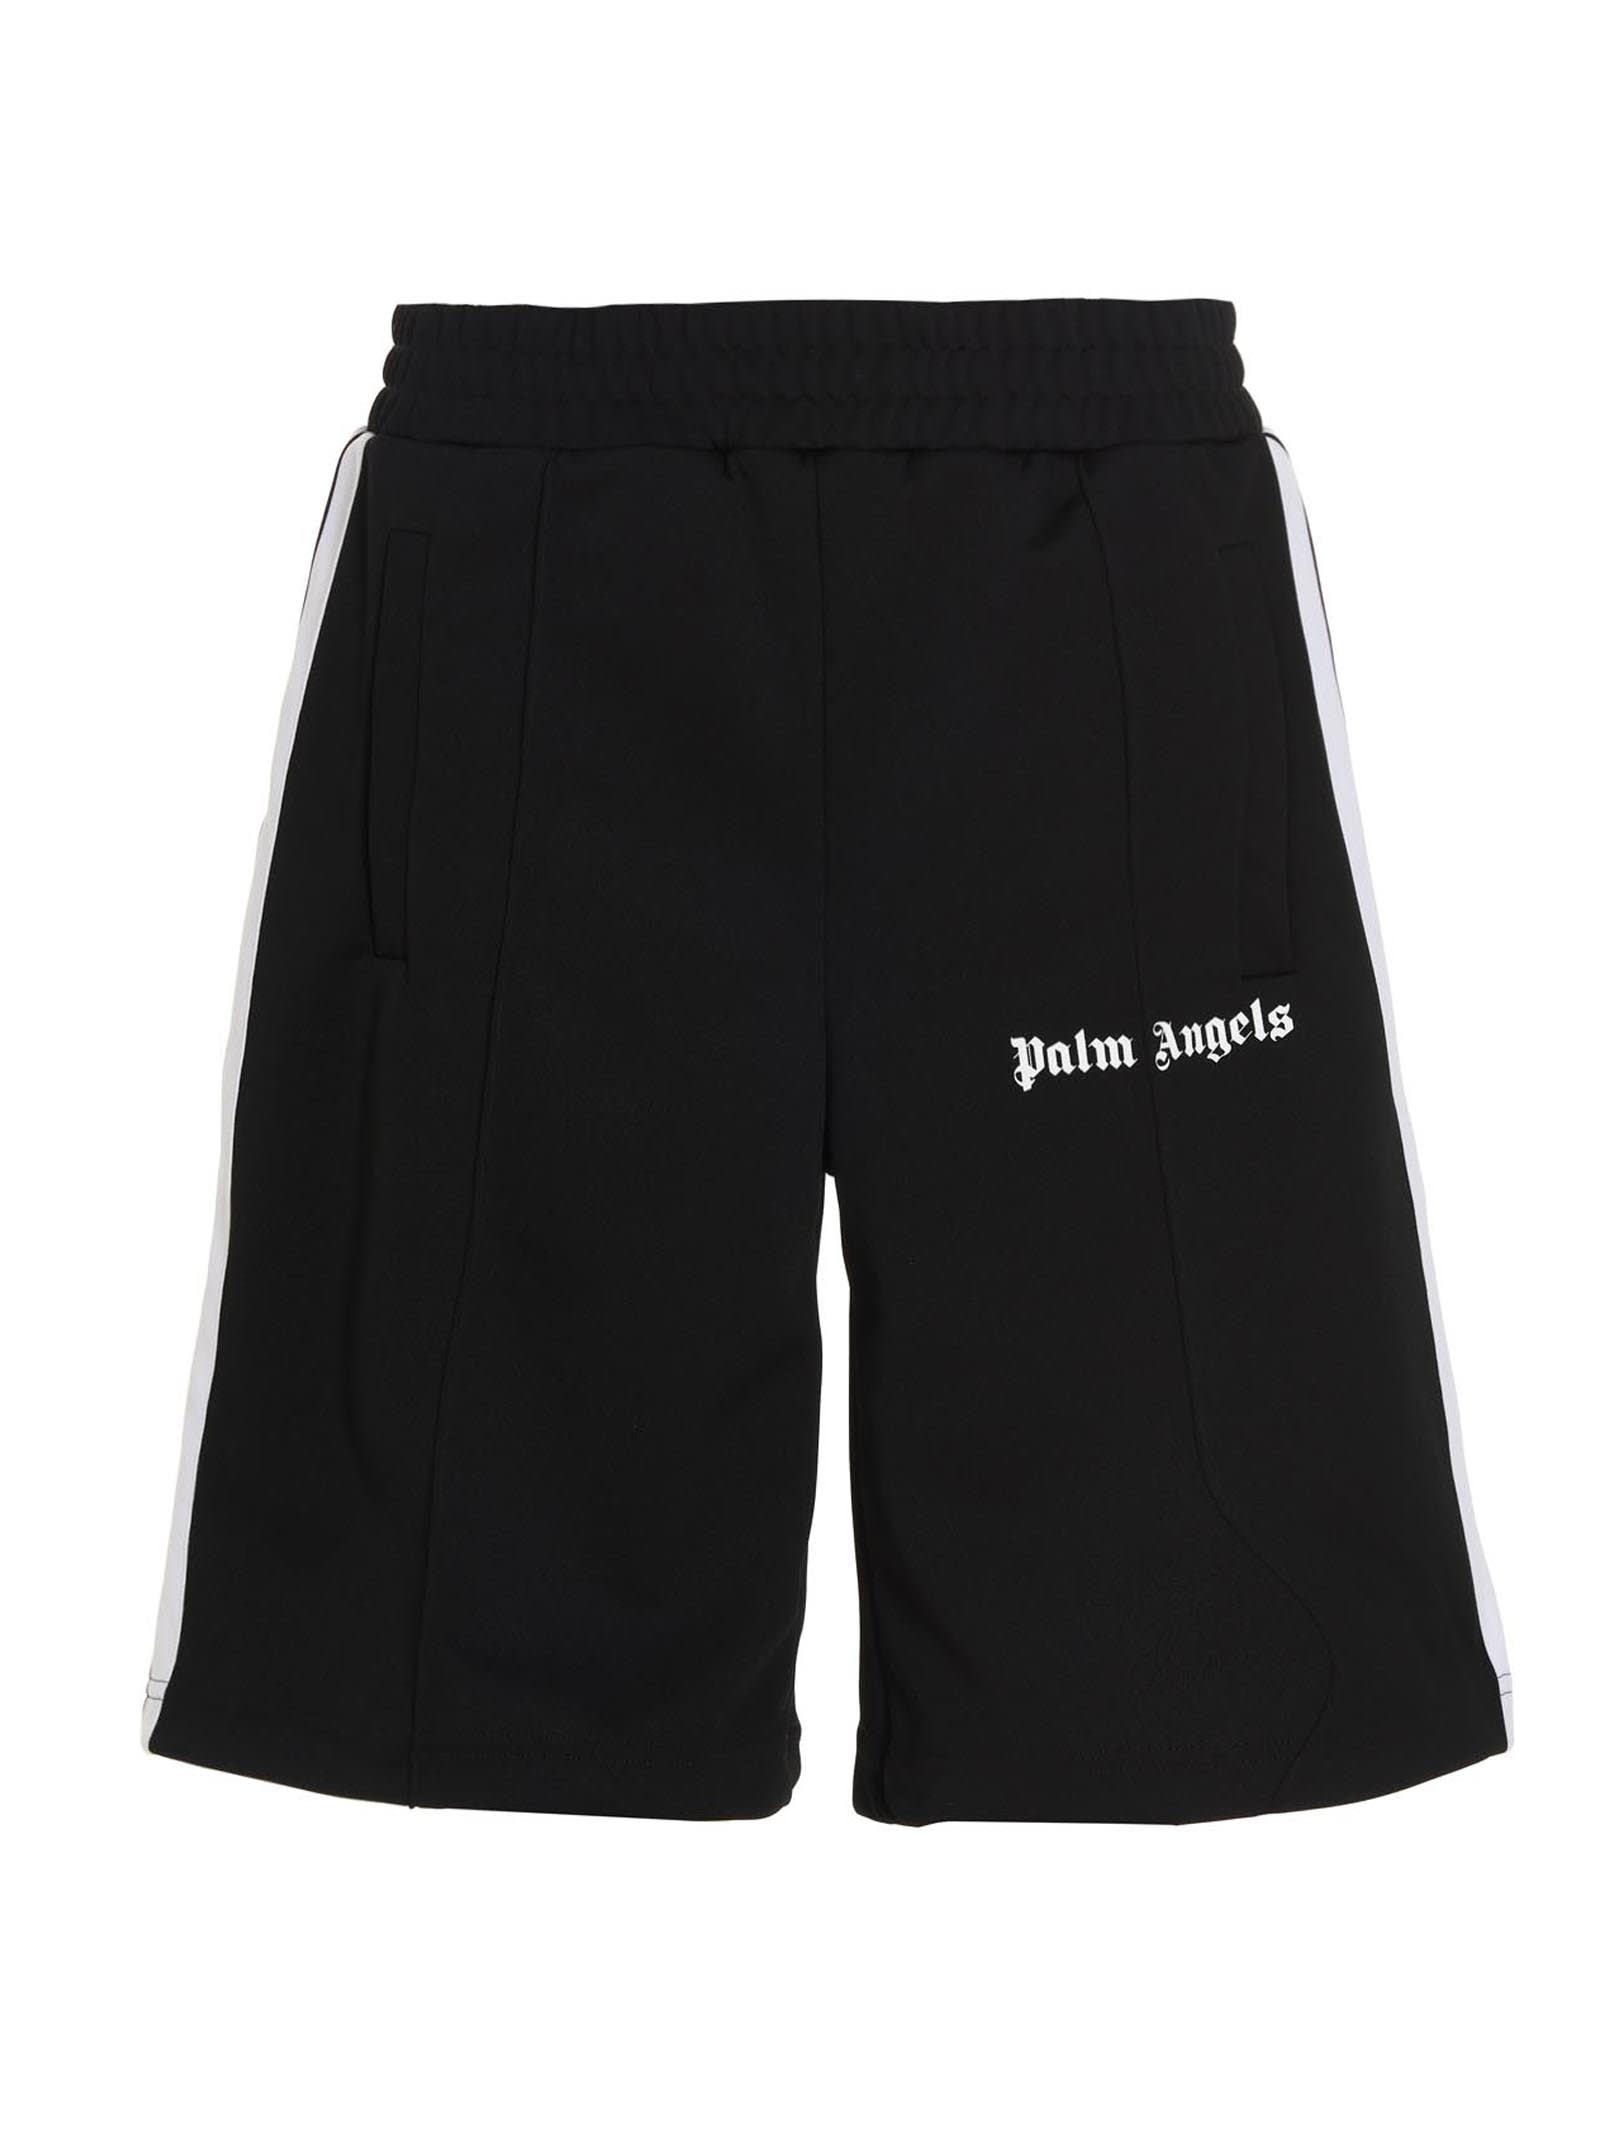 Palm Angels Bermuda Shorts With Contrast Bands